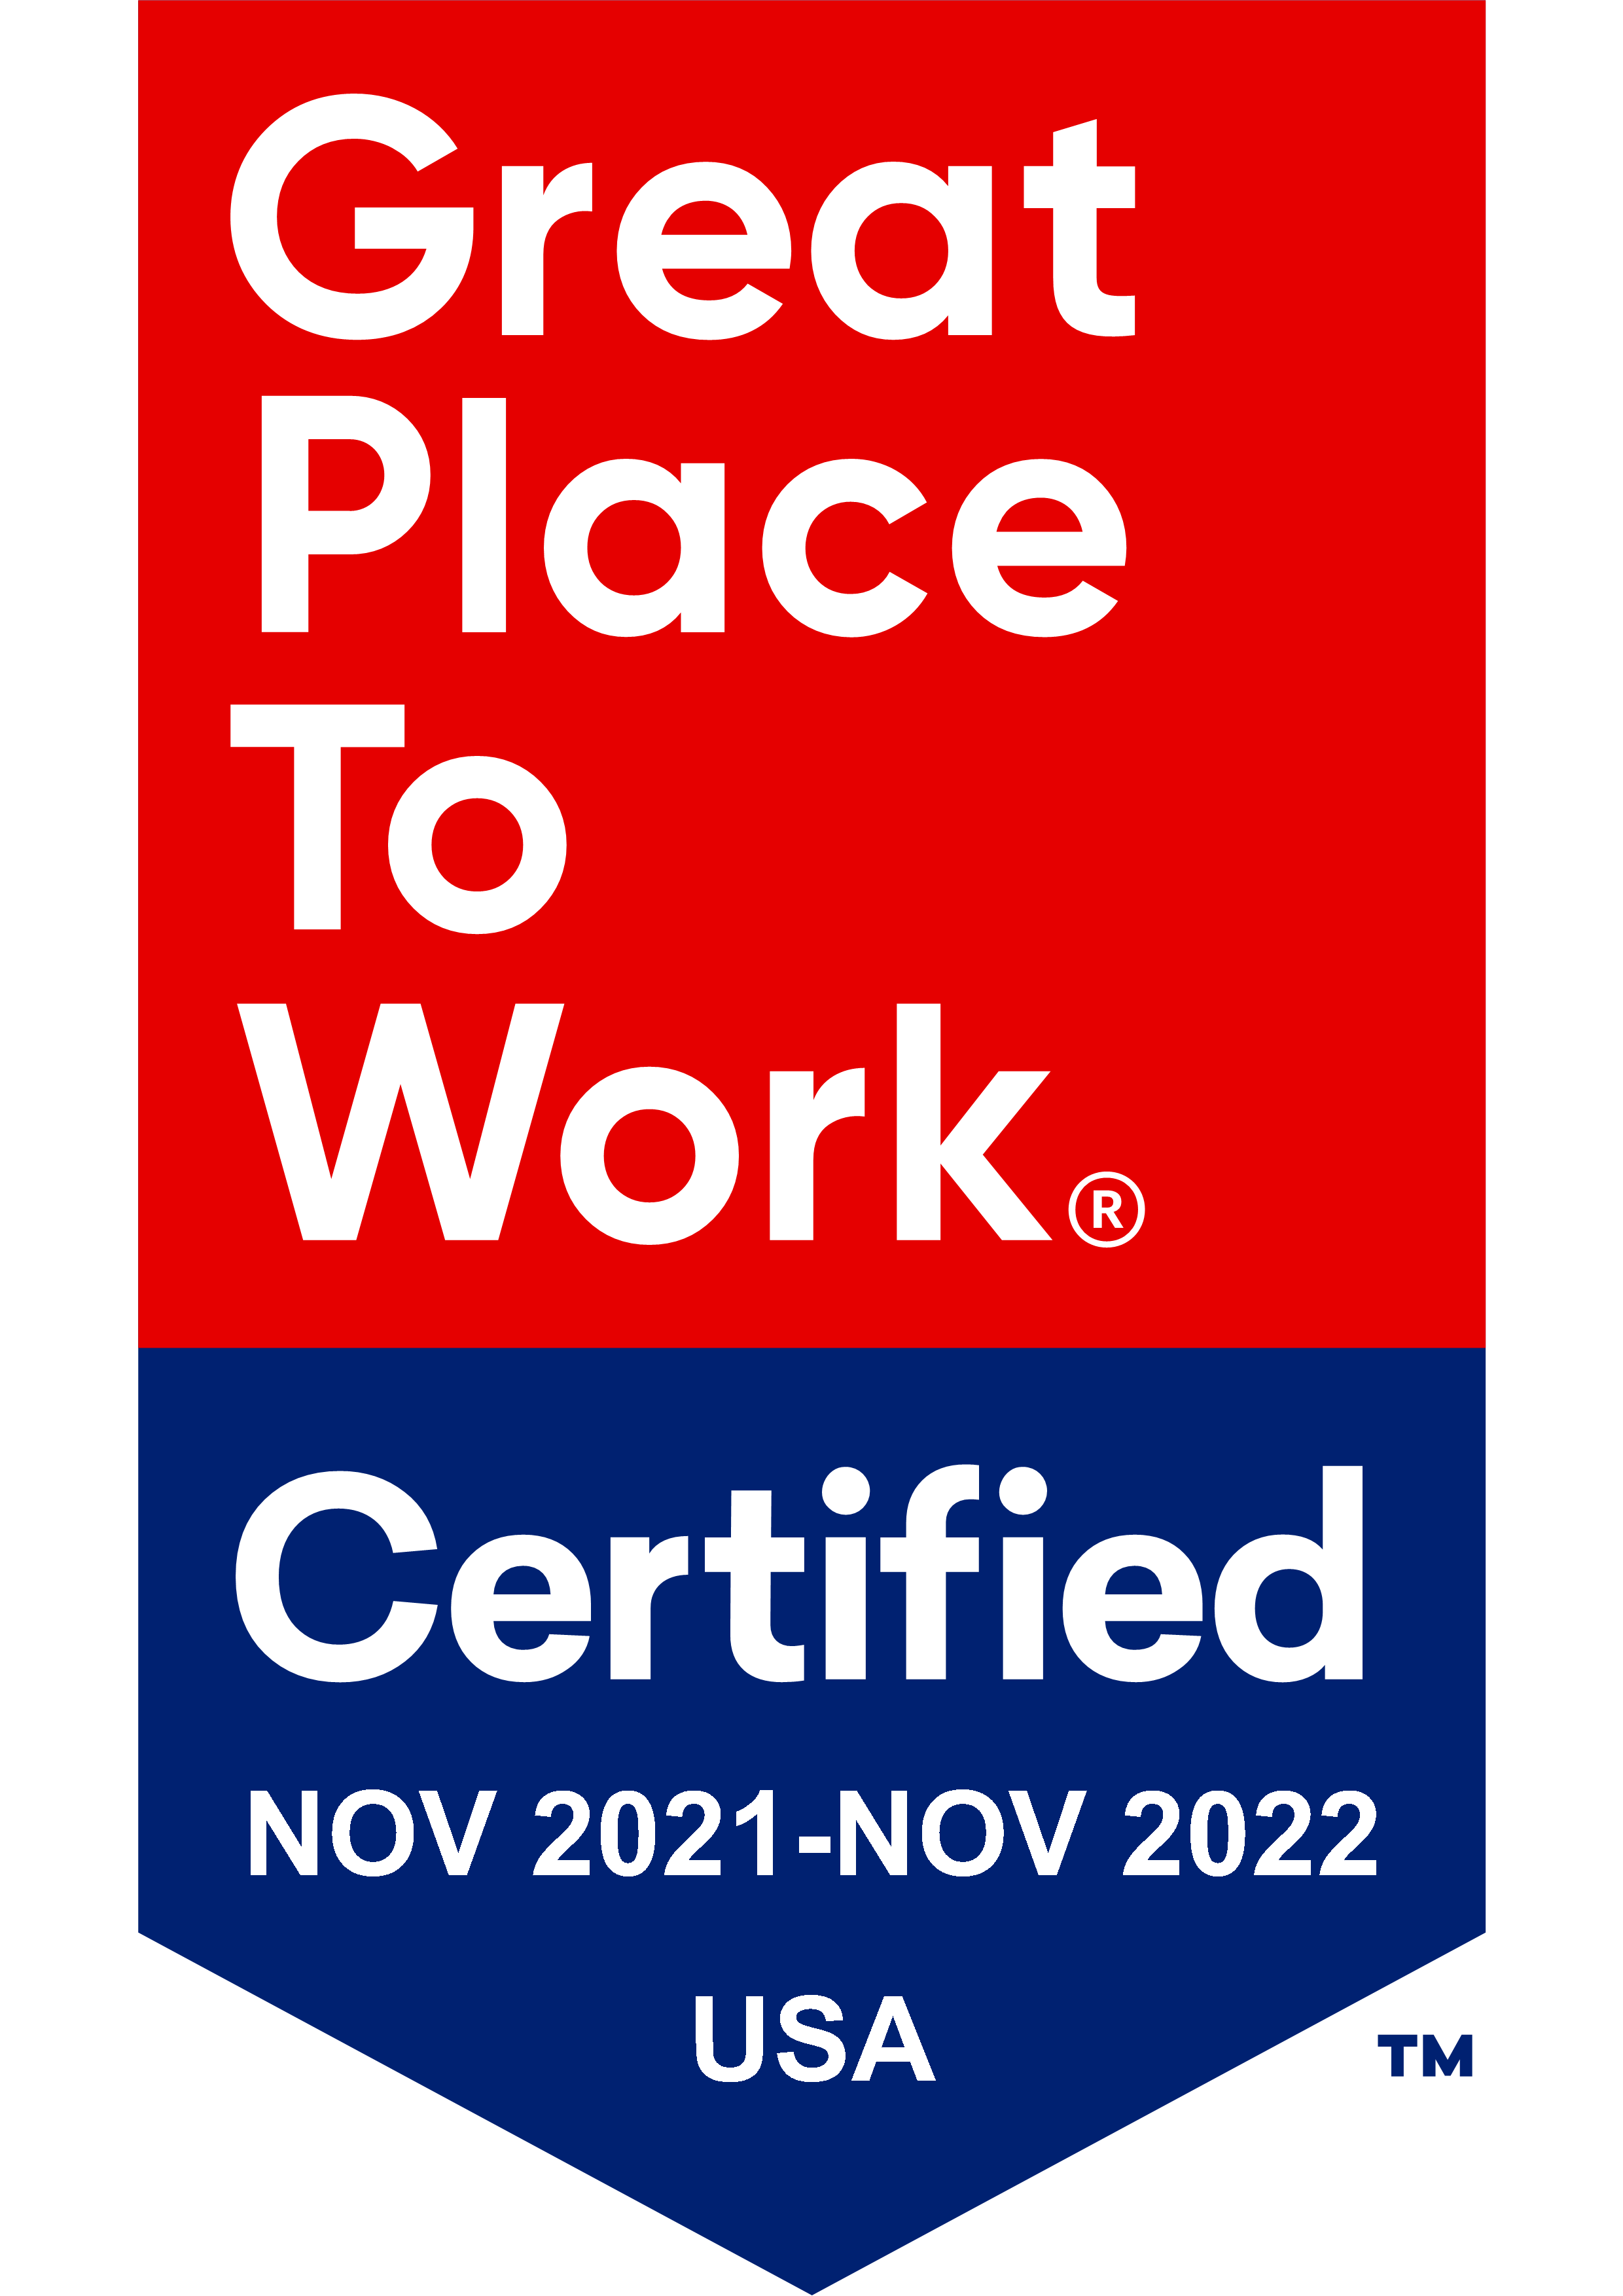 Great Place to Work - Fortegra Certification